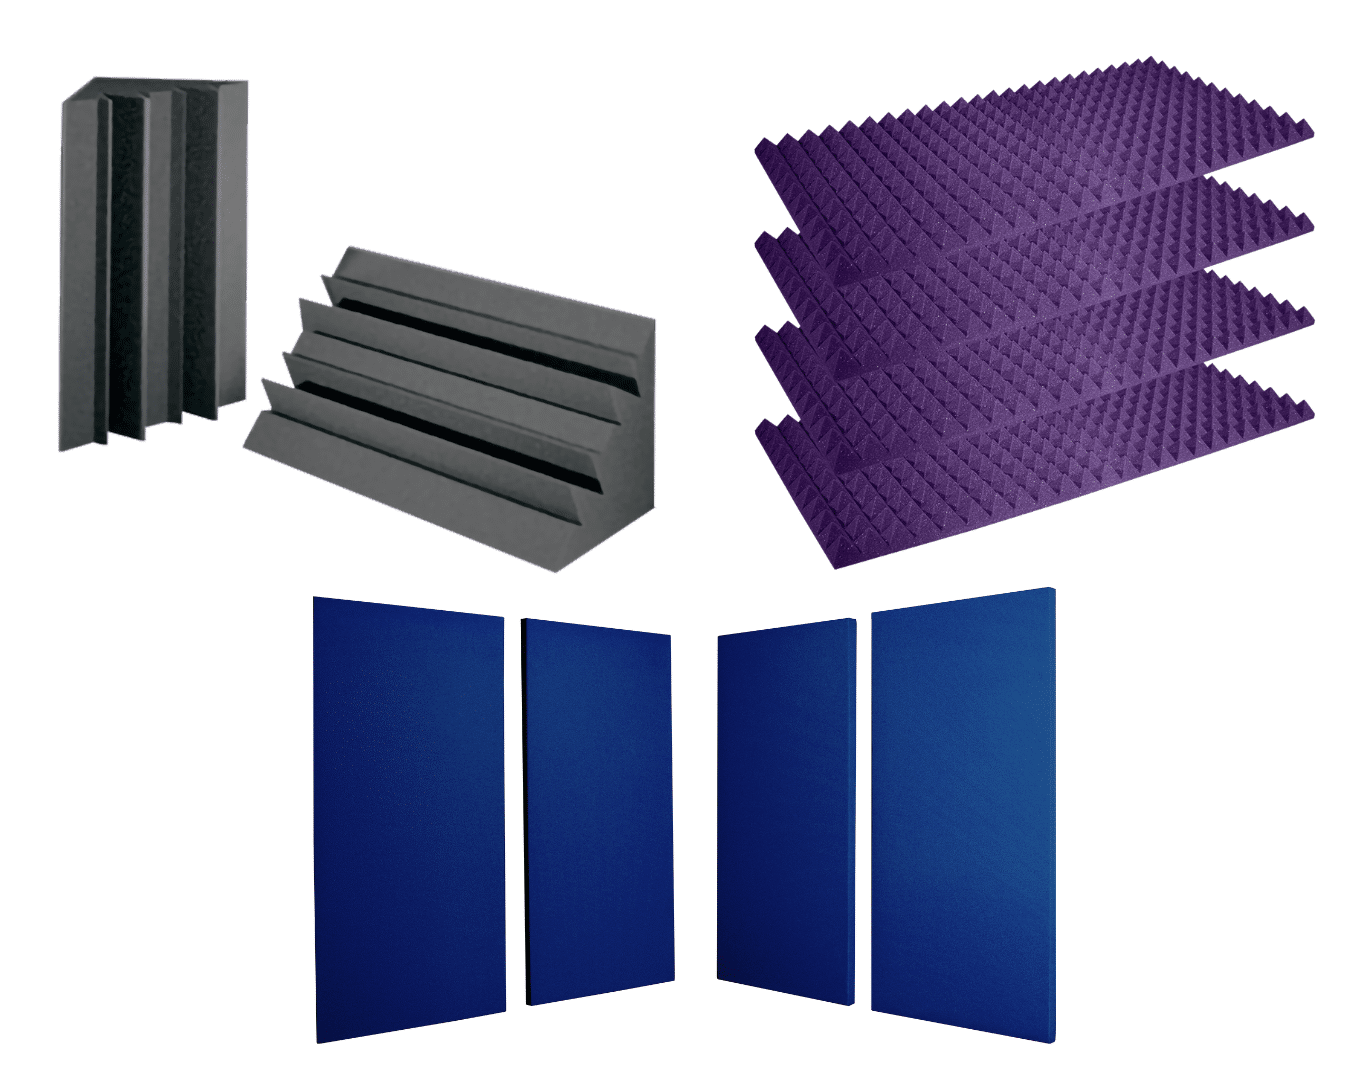 Image displaying Acoustic Treatment options for a WhisperRoom, including bass traps, acoustic studio foam, and fabric acoustic panels, enhancing sound quality and control within the sound isolation booth.